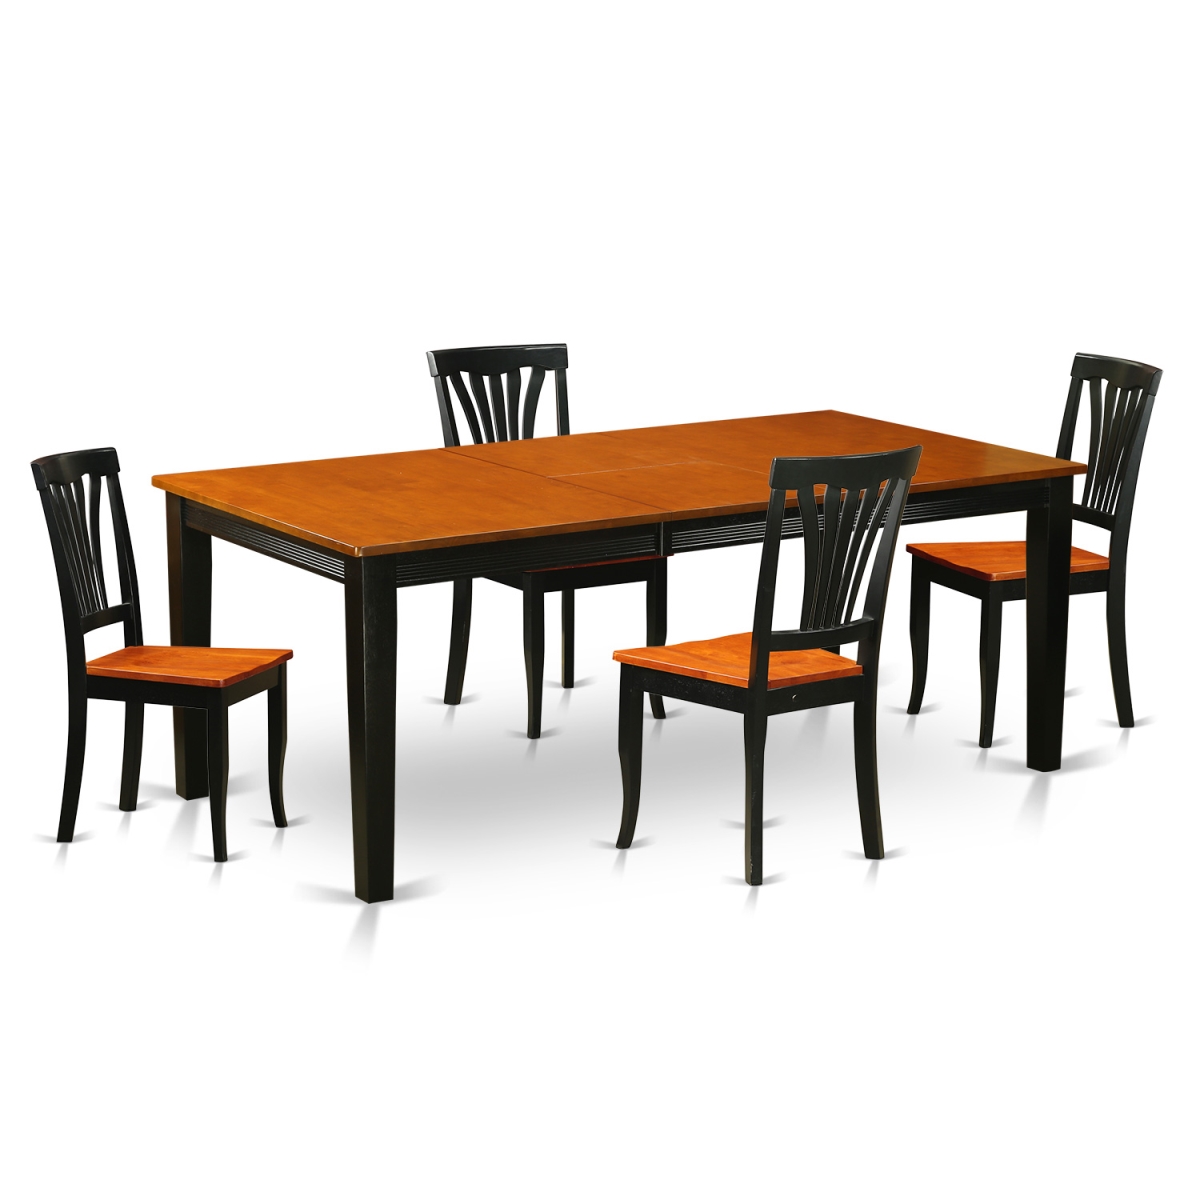 QUAV5-BCH-W Dining Room Set - Table with 4 Wooden Chairs, Black & Cherry - 5 Piece -  East West Furniture